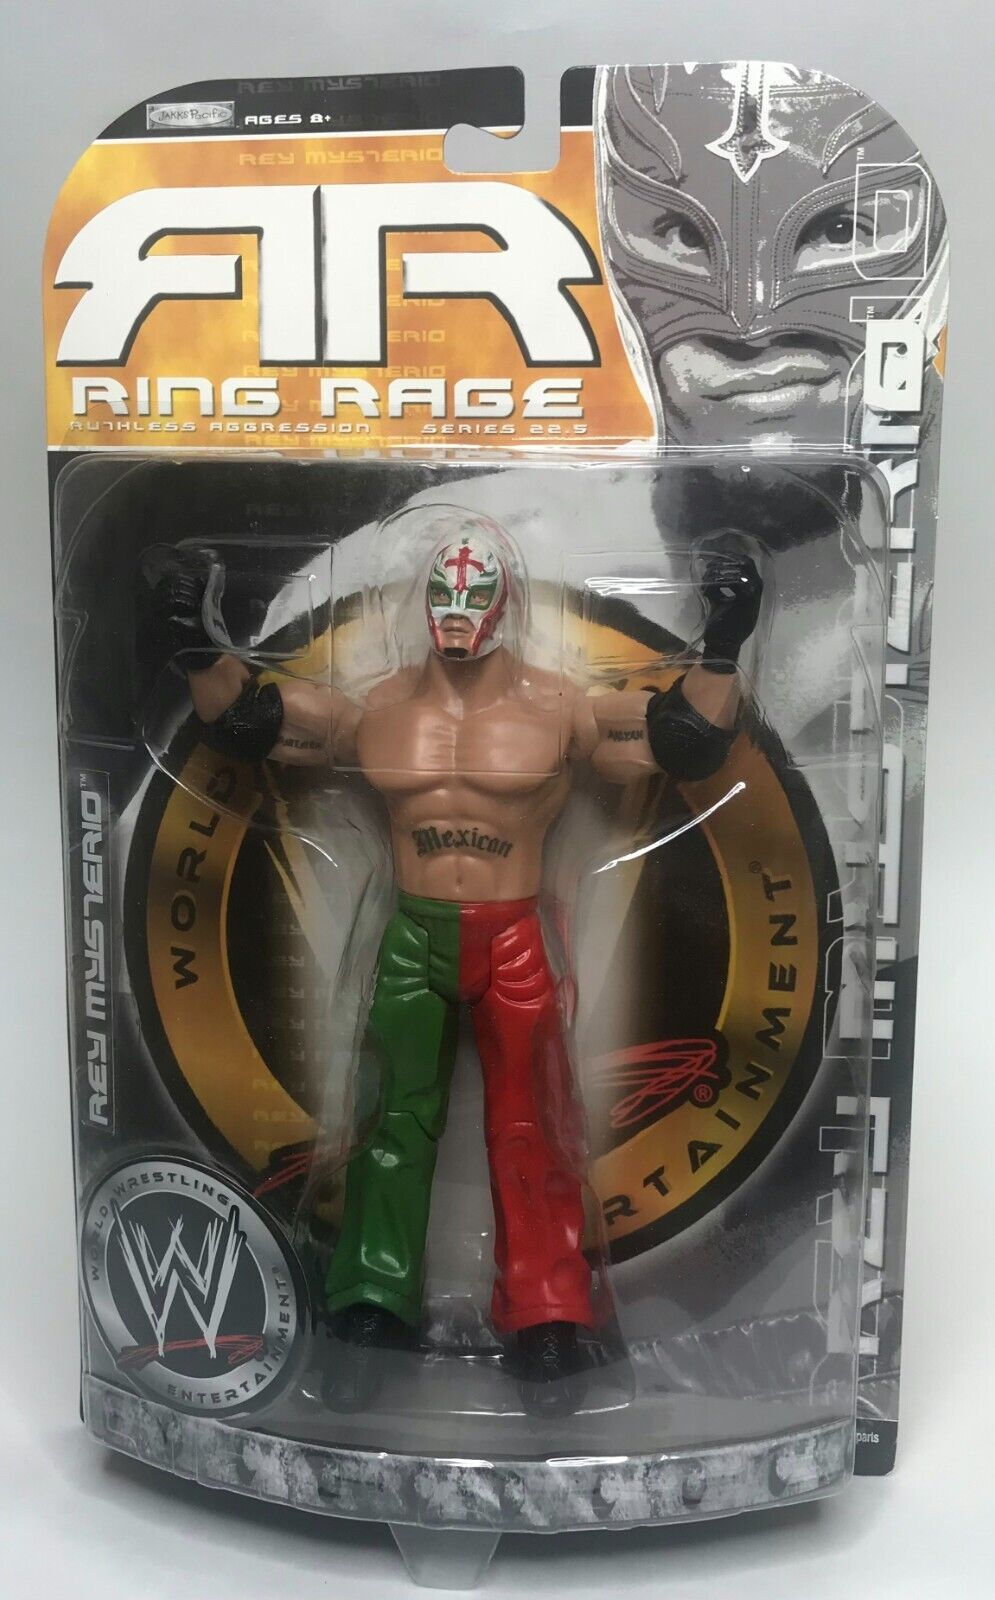 2006 WWE Jakks Pacific Ruthless Aggression Series 22.5 "Ring Rage" Rey Mysterio [Without Card]